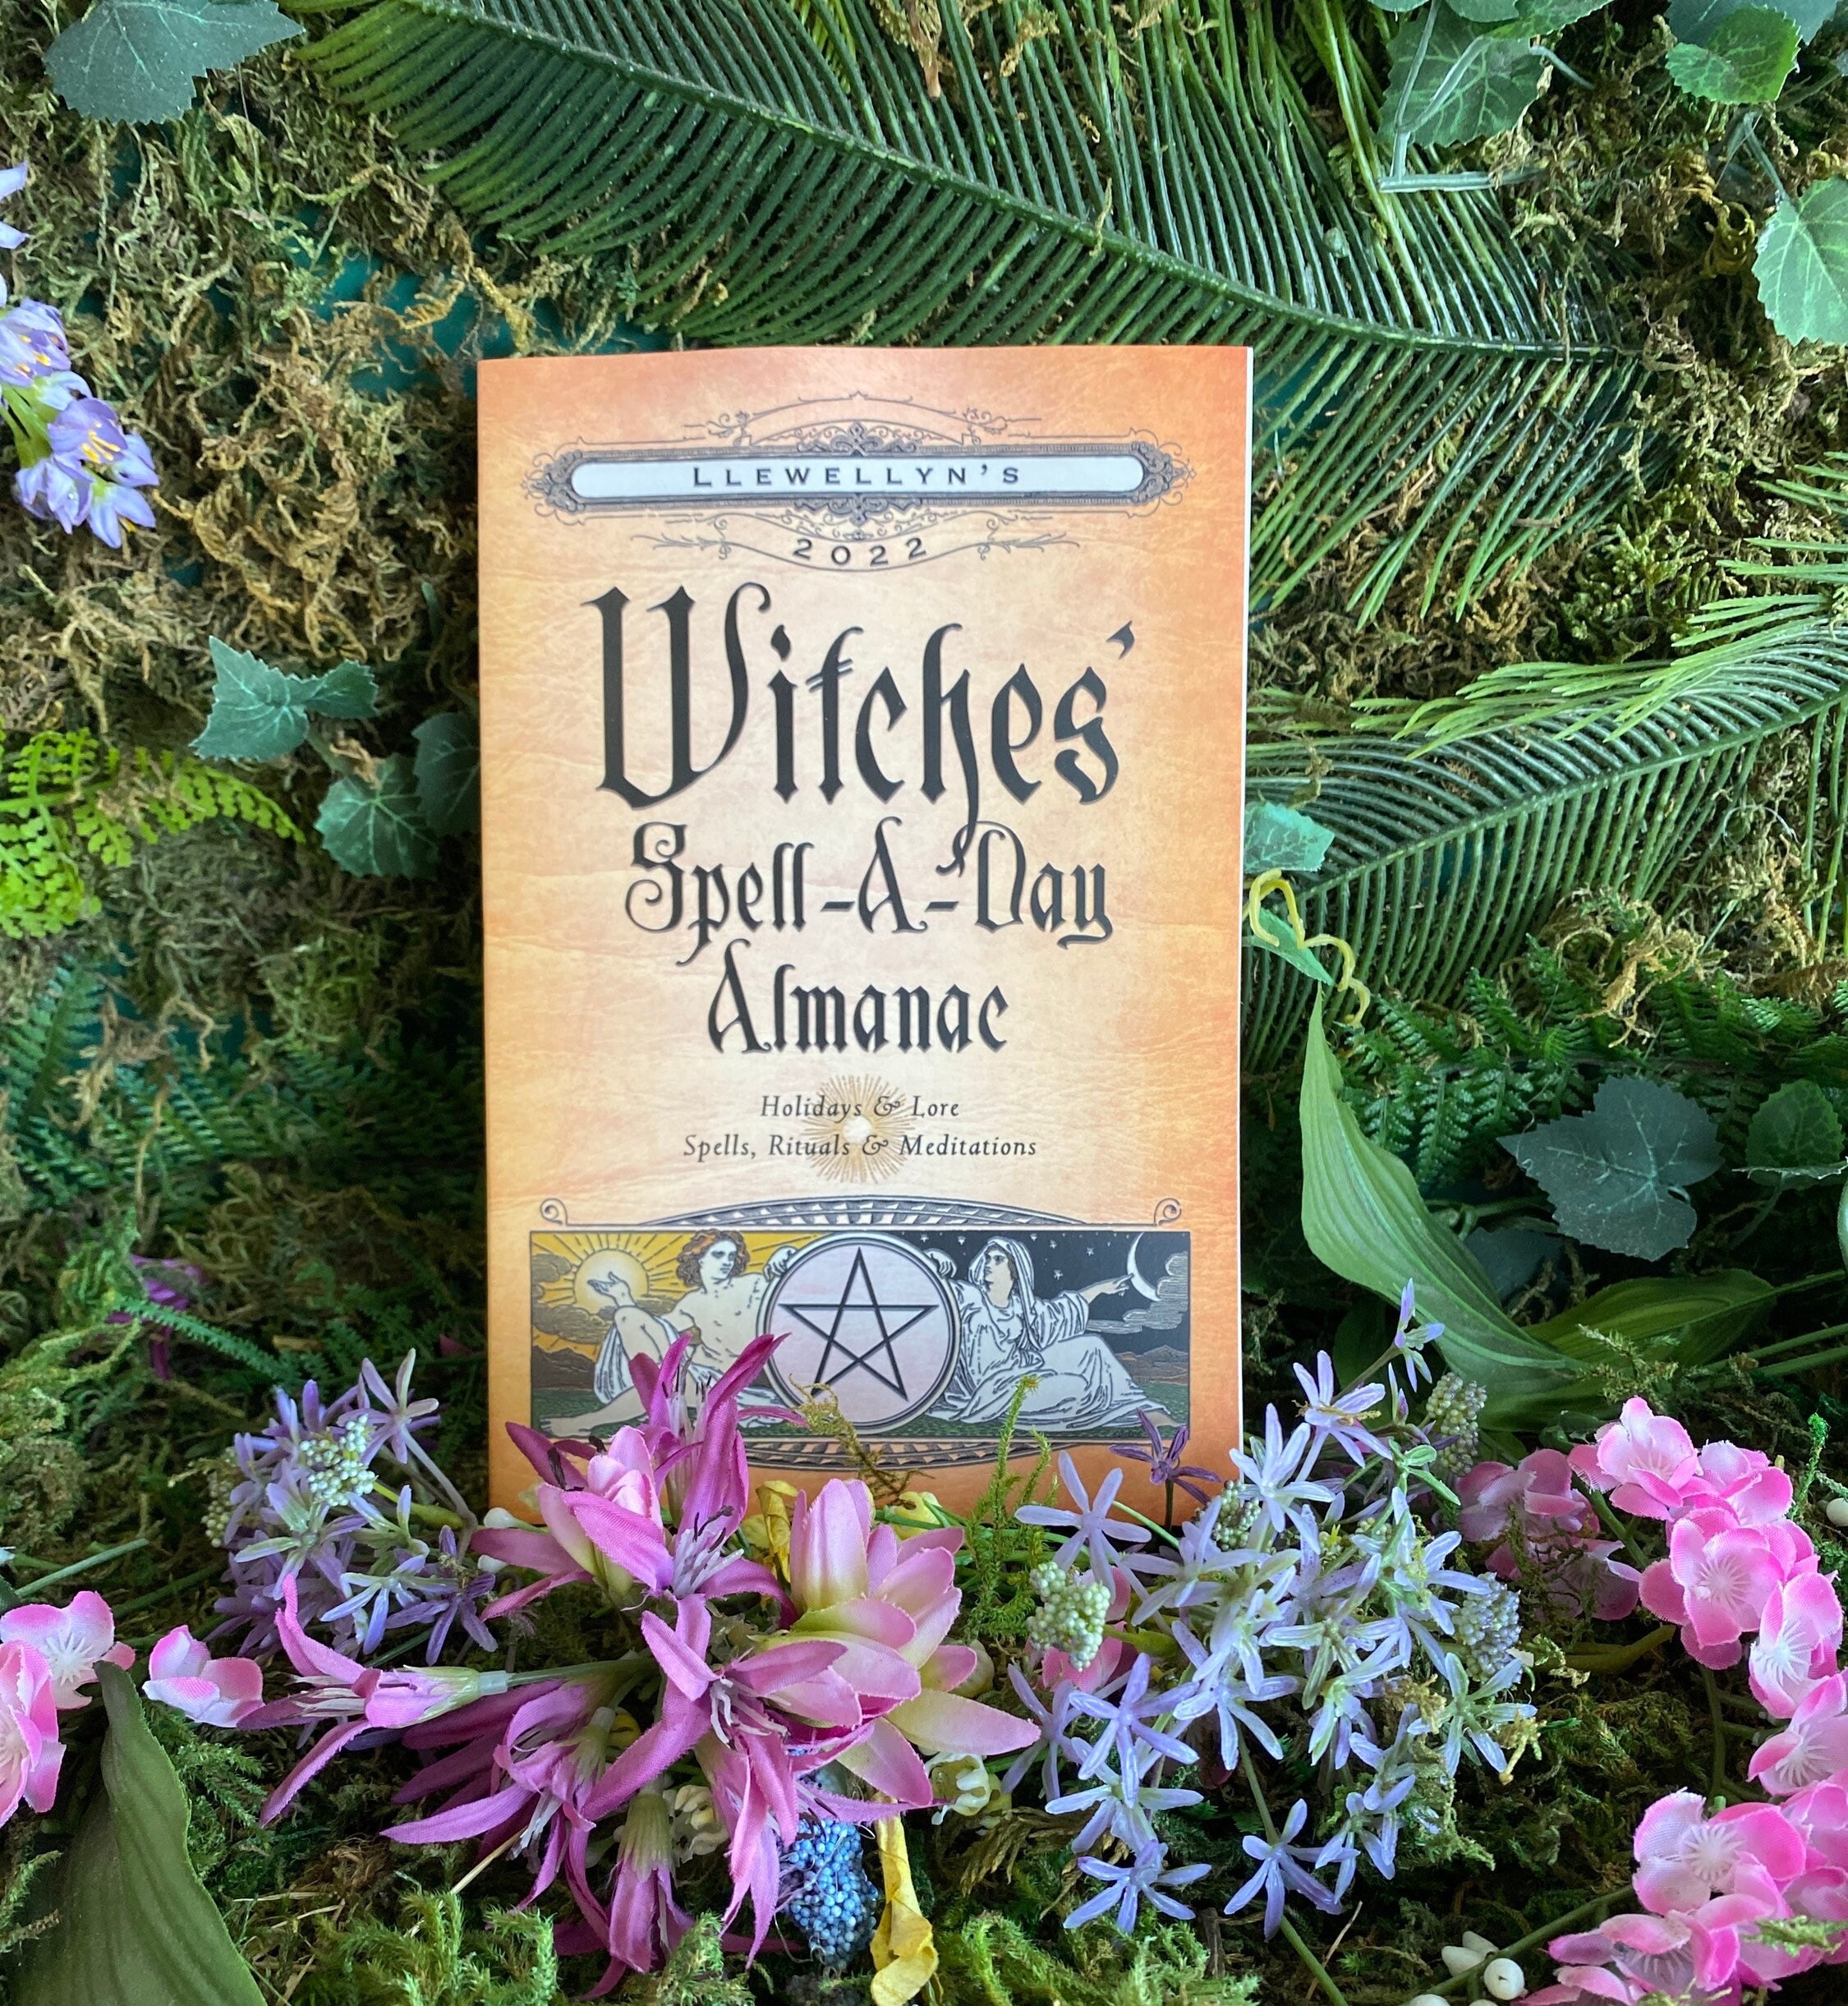 Rituals & Meditations Llewellyn's 2022 Witches' Spell-A-Day Almanac Spells Holidays & Lore 